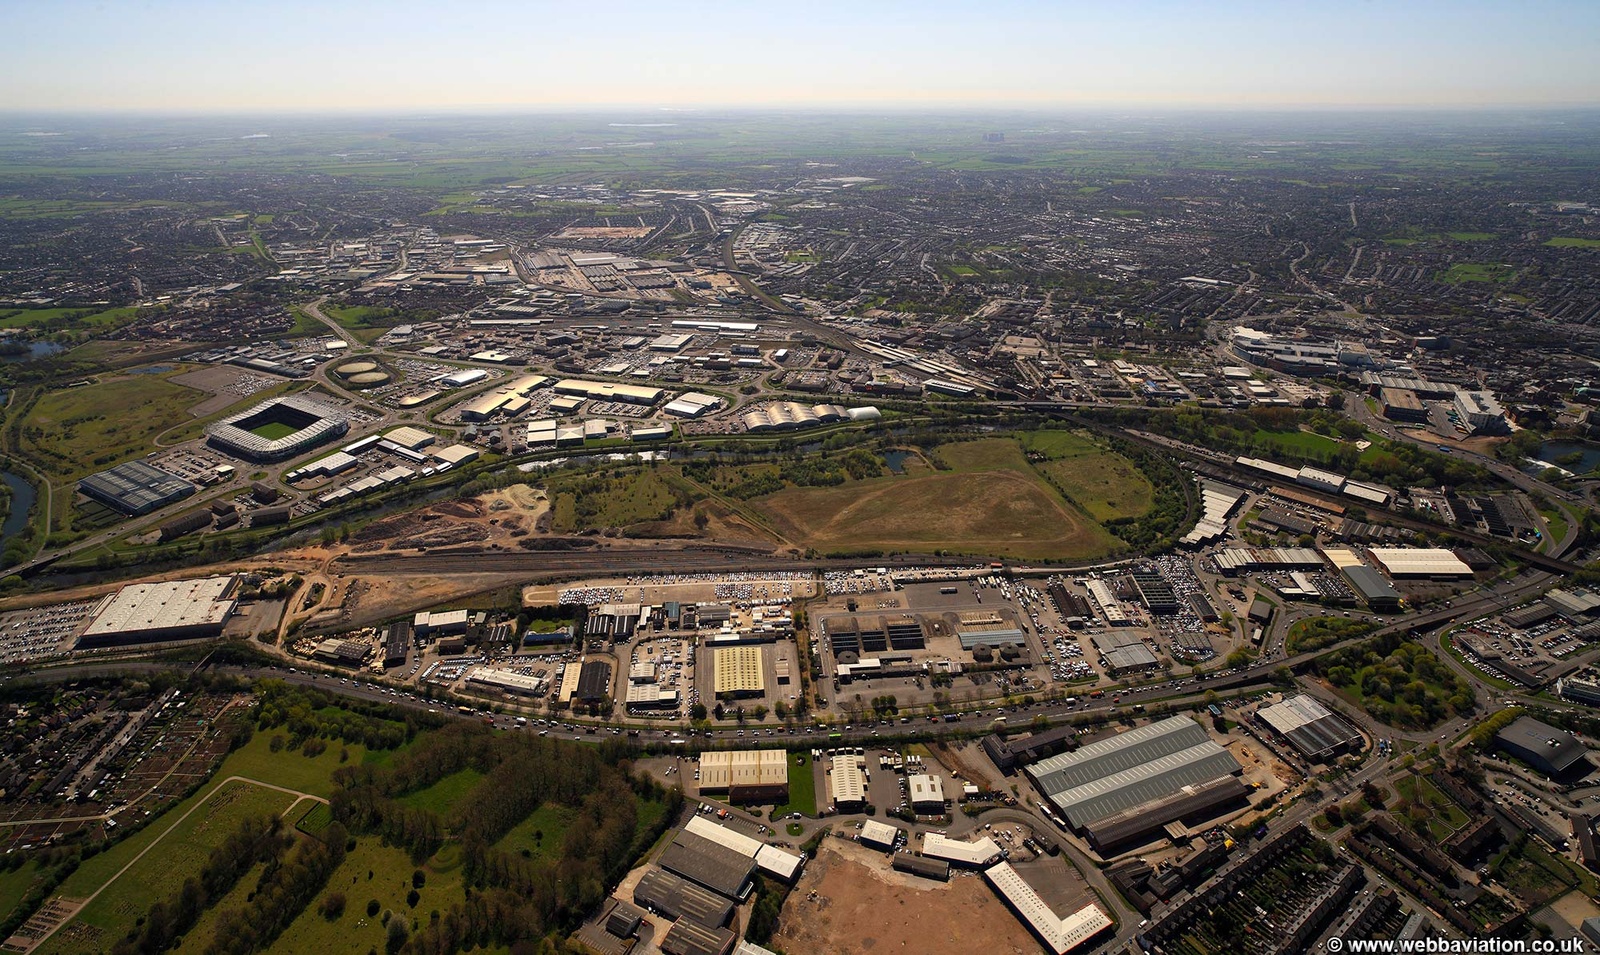  The Meadows Industrial Estate Derby UK  from the air